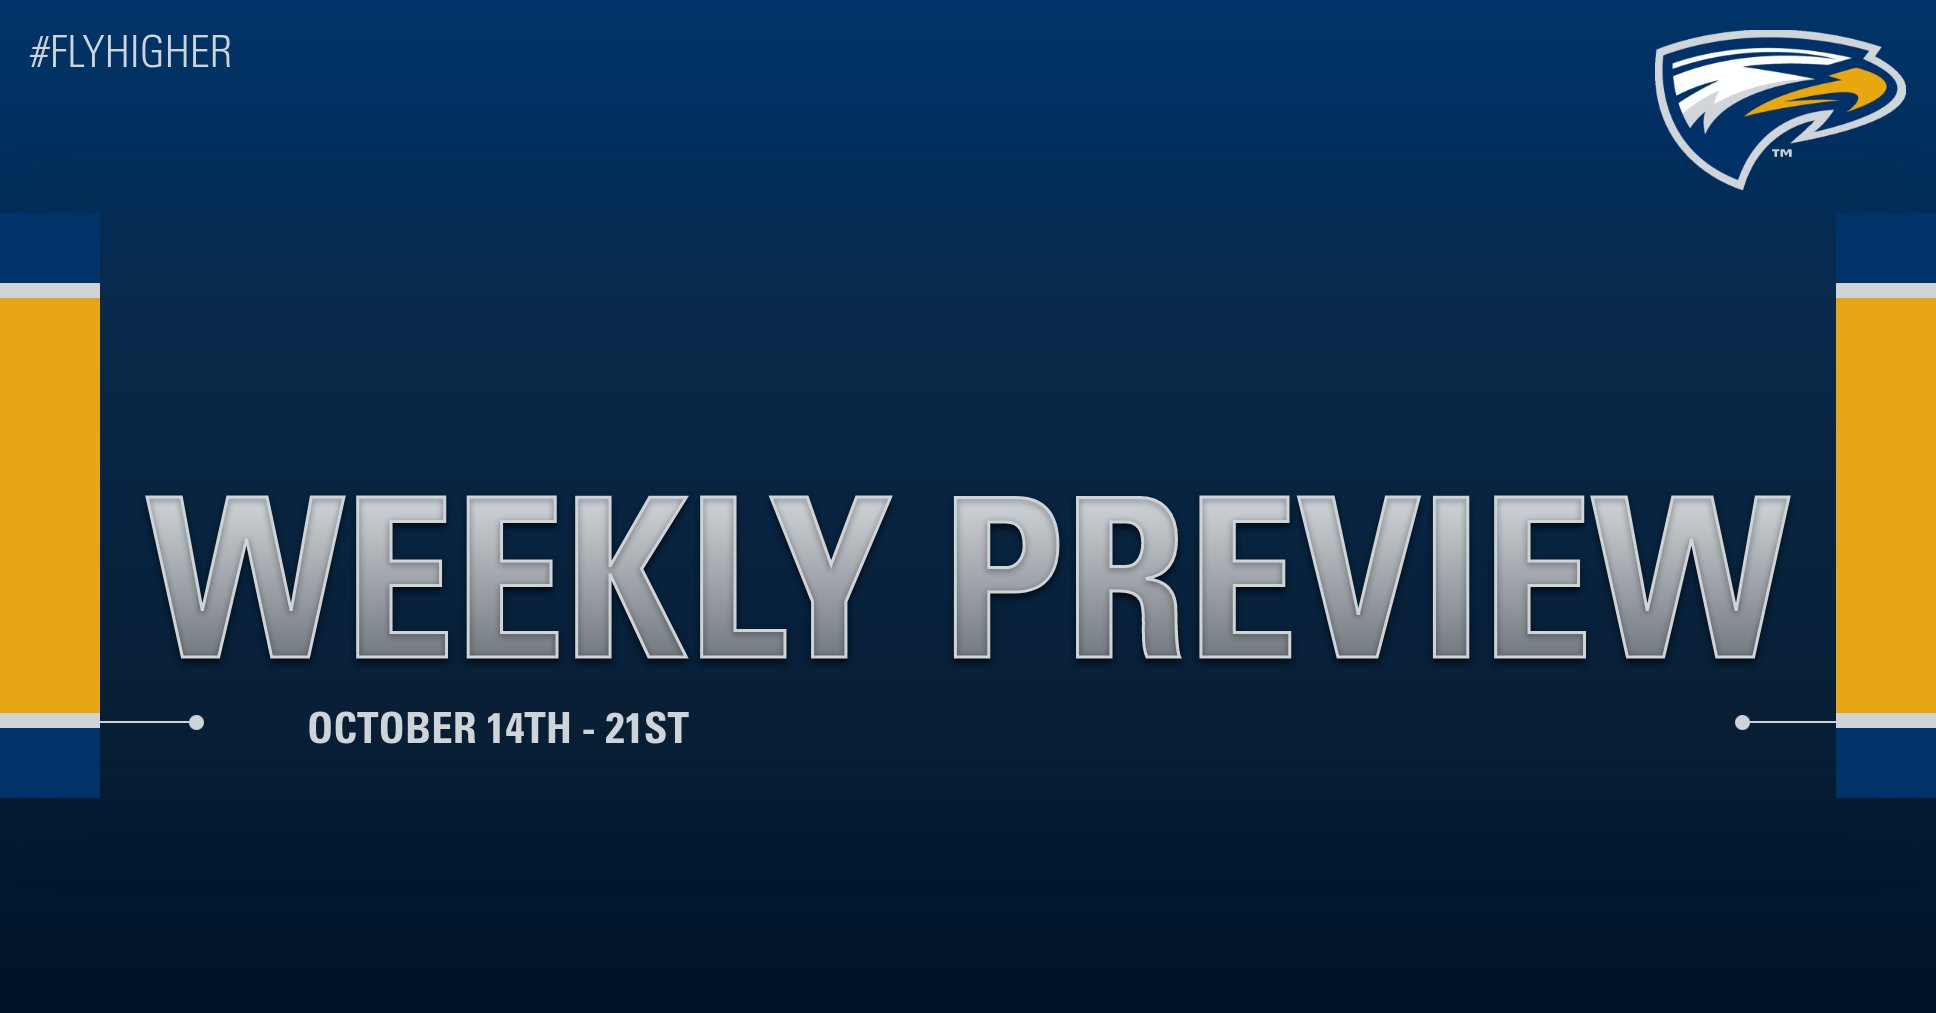 Emory Athletics Weekly Preview October 14th - 21st